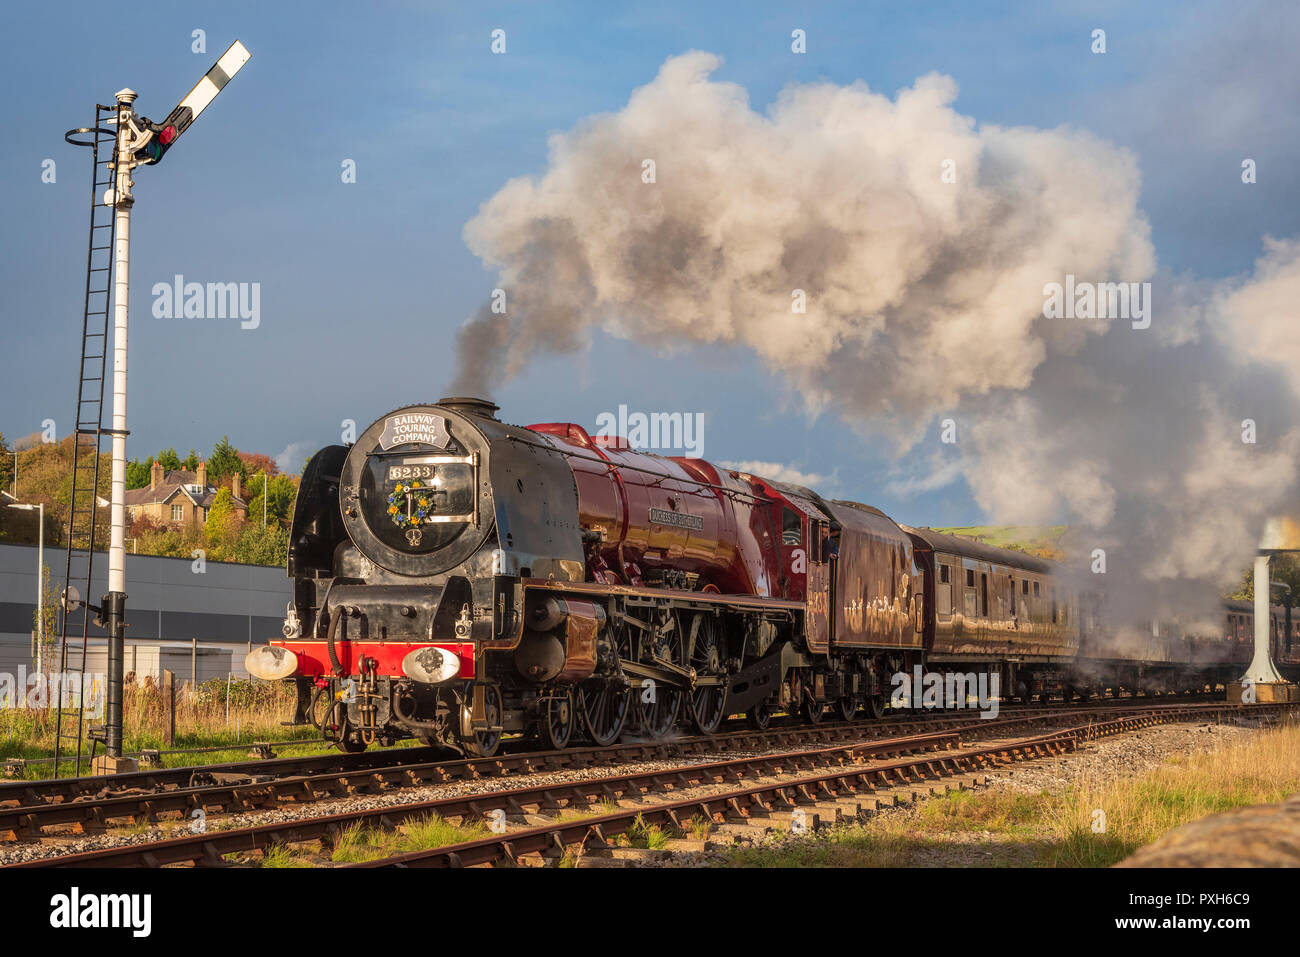 No.46233 'Duchess of Sutherland' the Midland and Scottish Railway (LMS) Princess Coronation Class 4-6-2 'Pacific' type steam locomotive built in 1938. Stock Photo